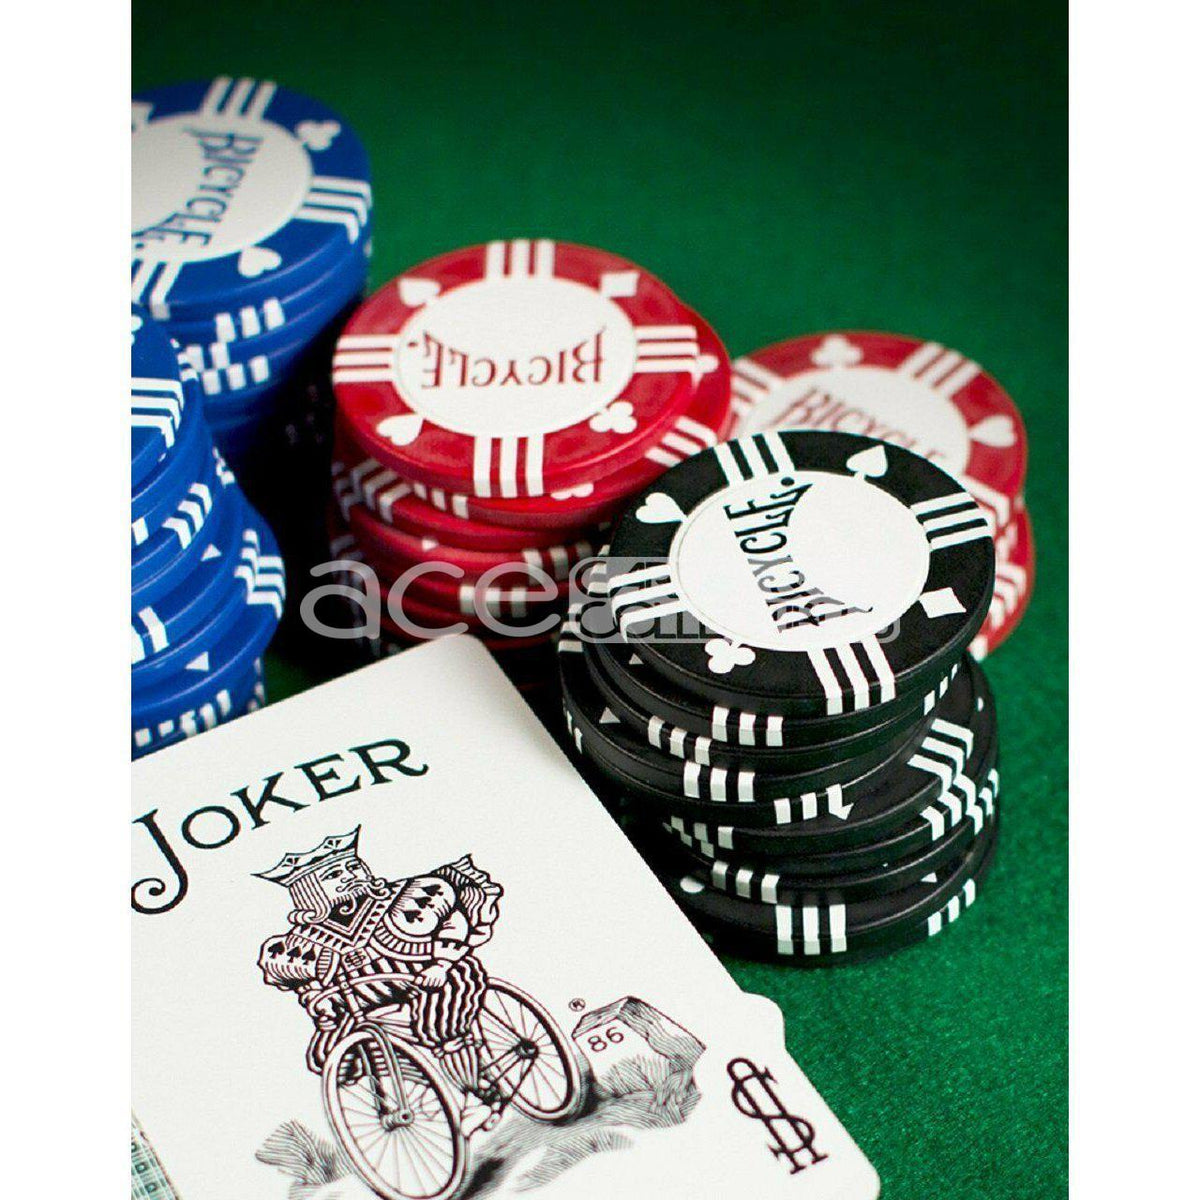 Bicycle Clay Poker Chips Filled 8 Gram (50pcs)-United States Playing Cards Company-Ace Cards &amp; Collectibles